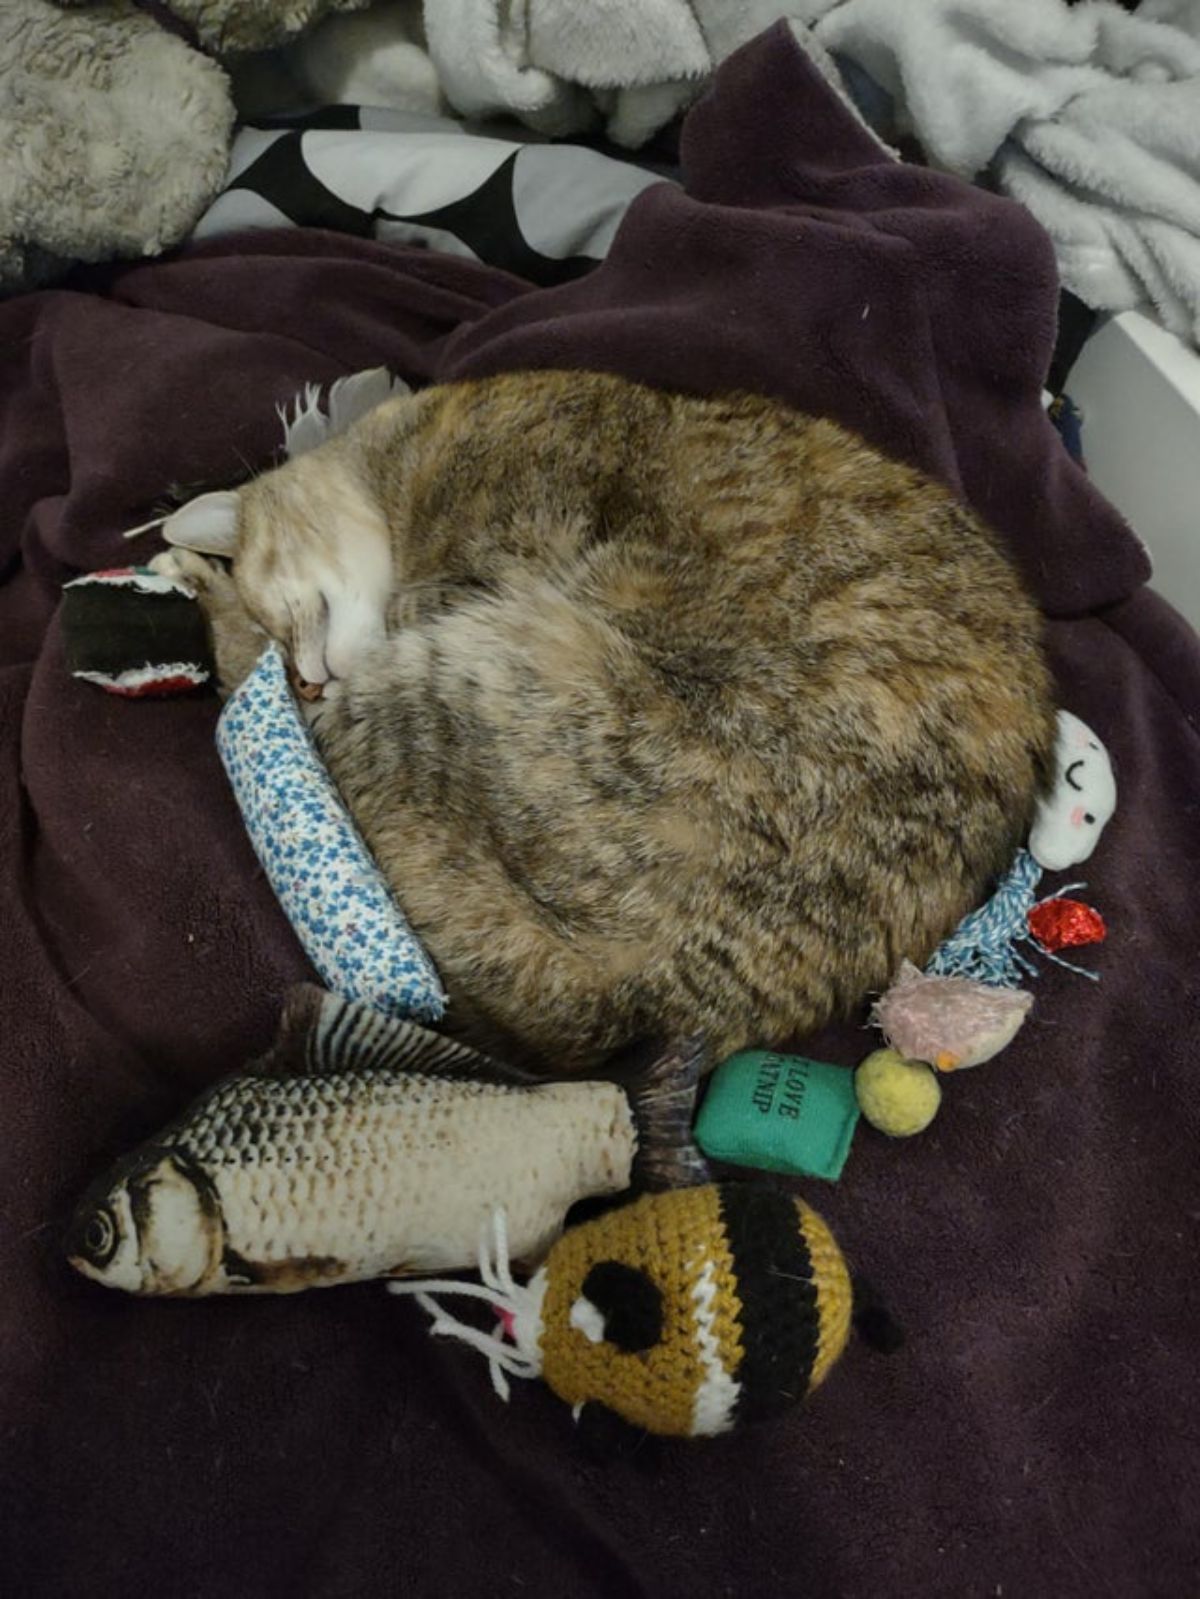 grey tabby sleeping on a bed in a ball surrounded by cat toys